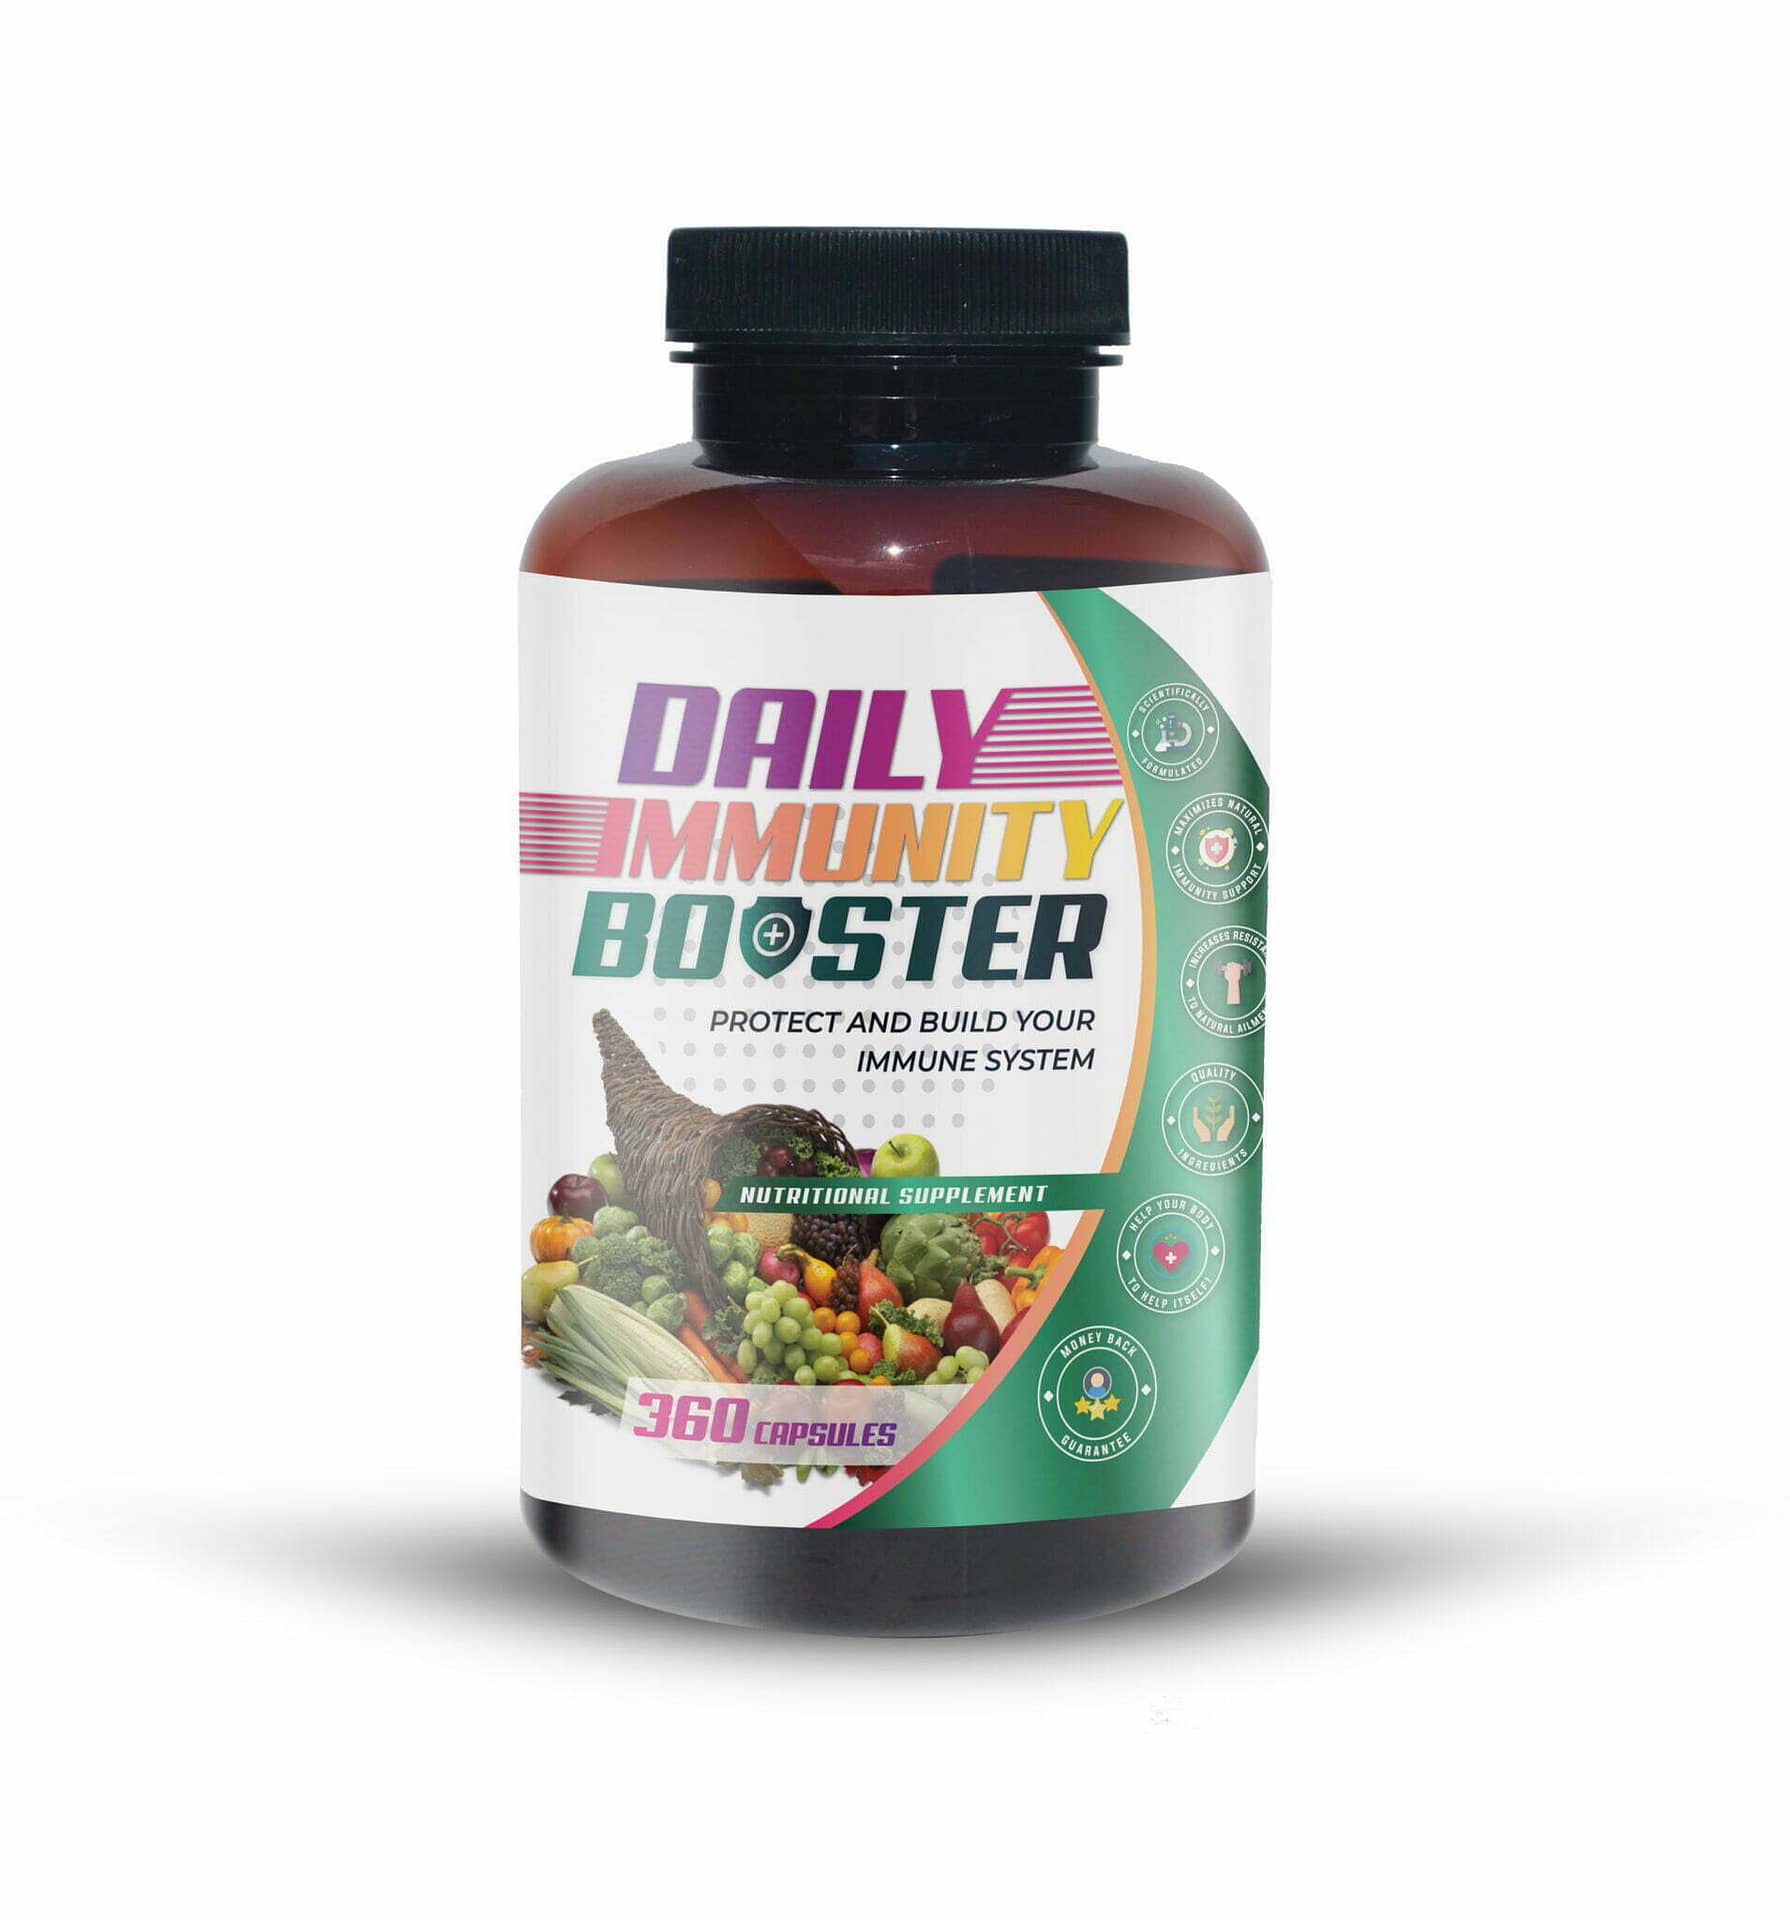 Daily-Immunity-Booster-360-1909x2048